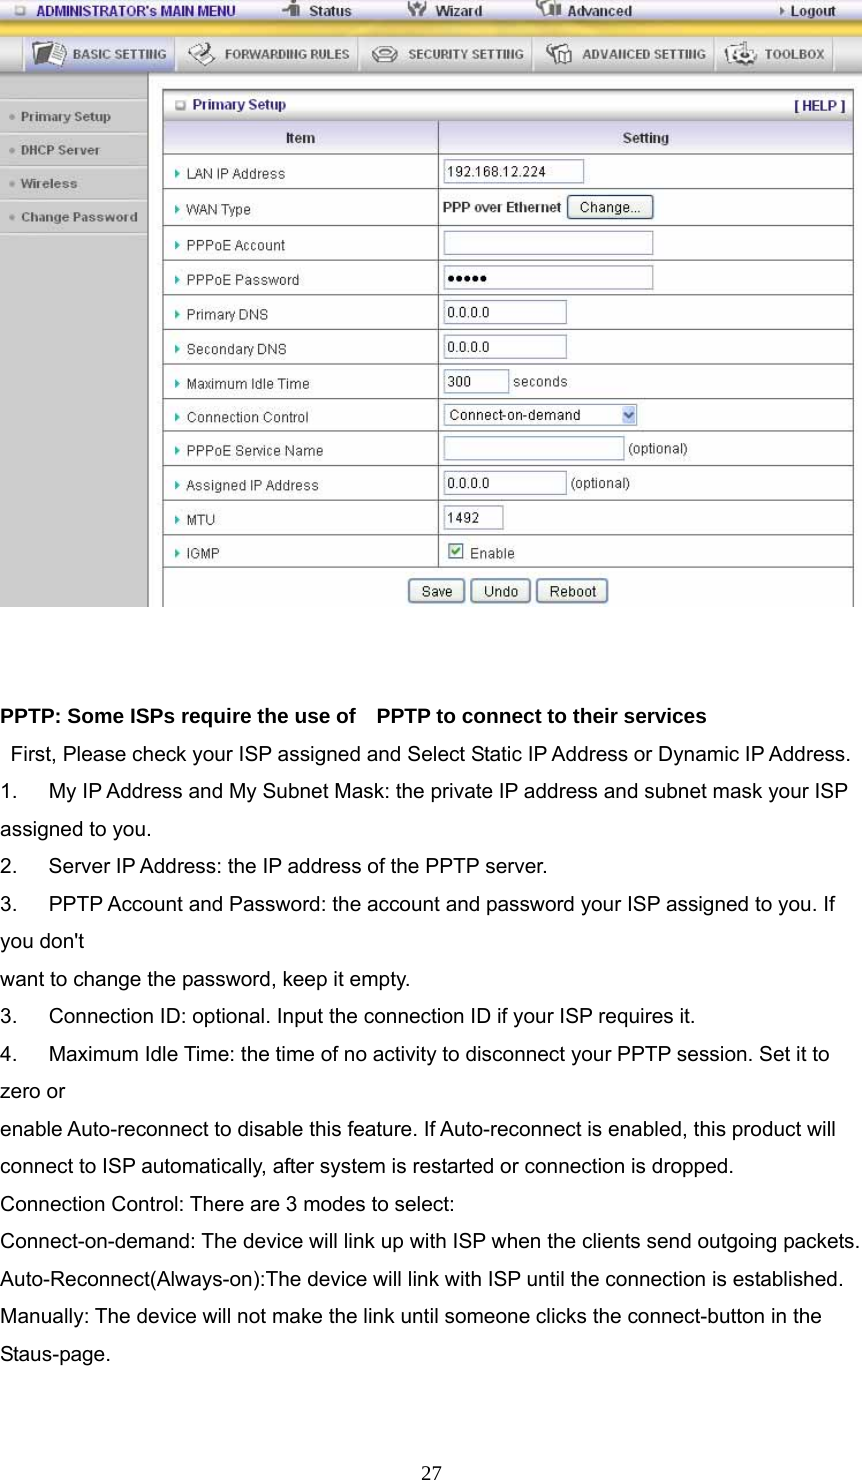  27   PPTP: Some ISPs require the use of    PPTP to connect to their services    First, Please check your ISP assigned and Select Static IP Address or Dynamic IP Address. 1.      My IP Address and My Subnet Mask: the private IP address and subnet mask your ISP assigned to you.   2.    Server IP Address: the IP address of the PPTP server.   3.   PPTP Account and Password: the account and password your ISP assigned to you. If you don&apos;t want to change the password, keep it empty.   3.      Connection ID: optional. Input the connection ID if your ISP requires it.   4.      Maximum Idle Time: the time of no activity to disconnect your PPTP session. Set it to zero or   enable Auto-reconnect to disable this feature. If Auto-reconnect is enabled, this product will   connect to ISP automatically, after system is restarted or connection is dropped. Connection Control: There are 3 modes to select: Connect-on-demand: The device will link up with ISP when the clients send outgoing packets. Auto-Reconnect(Always-on):The device will link with ISP until the connection is established. Manually: The device will not make the link until someone clicks the connect-button in the Staus-page.  